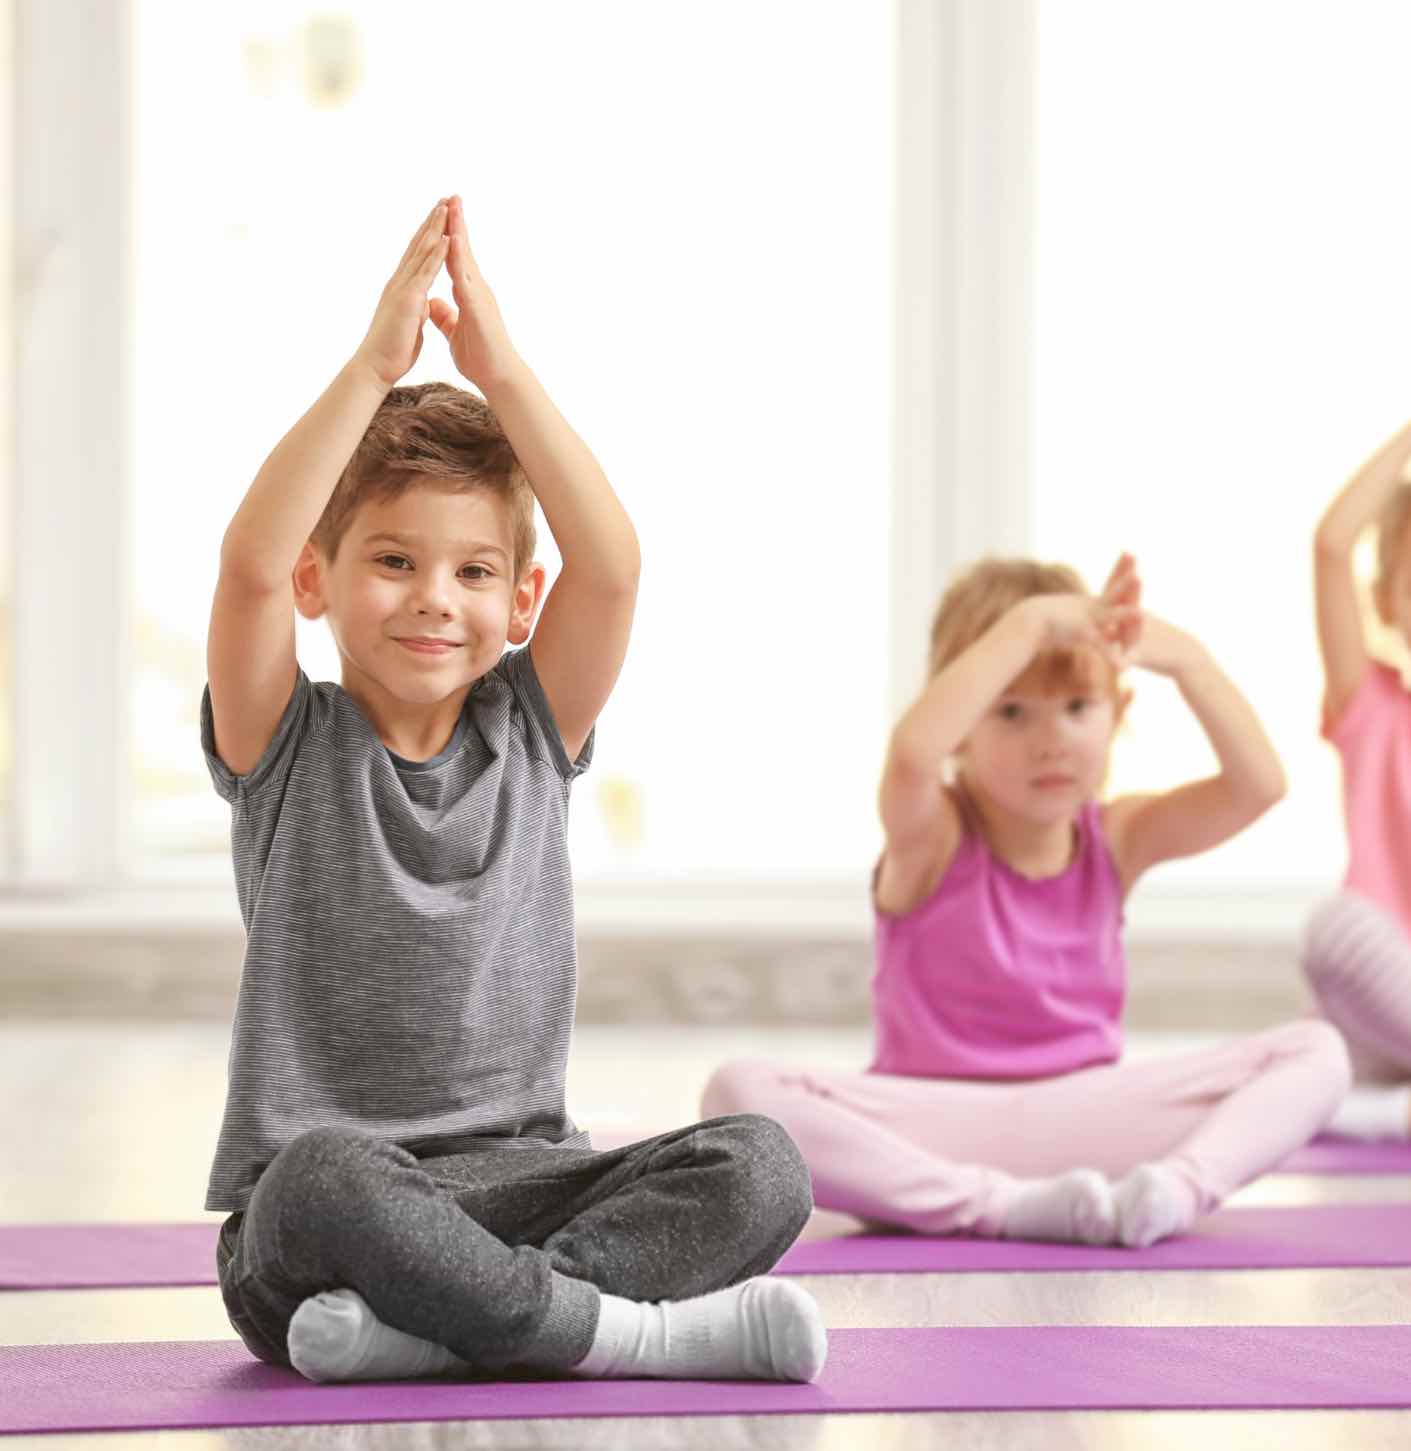 These kids enjoy practicing mindfulness through yoga - learn more tips with Romp n' Roll in Glen Allen, VA!